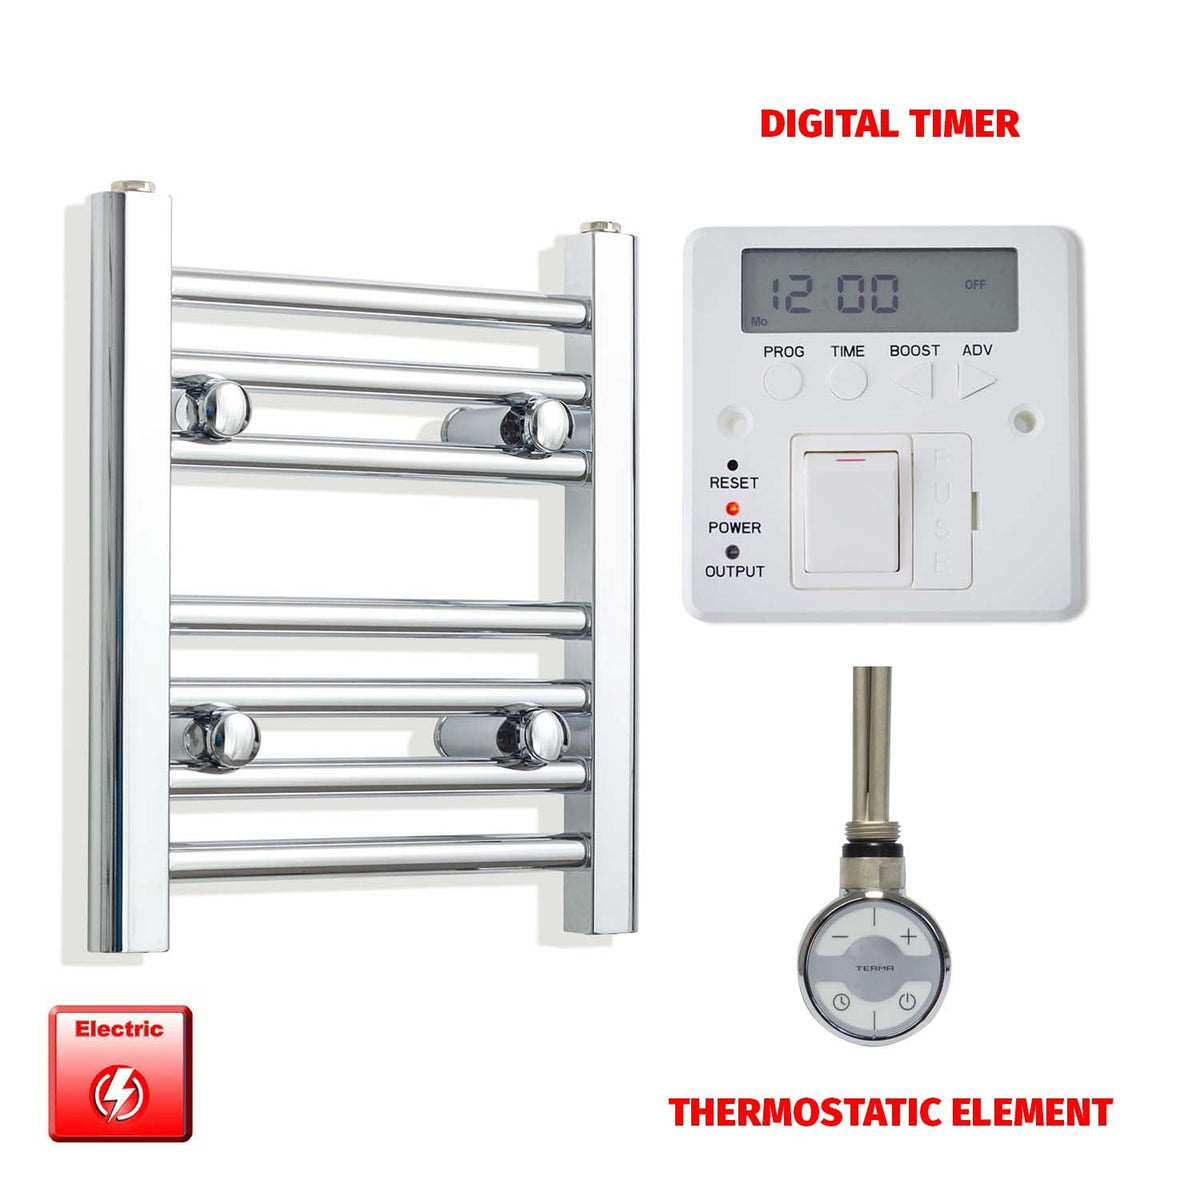 400mm High 350mm Wid Pre-Filled Electric Heated Towel Rail Radiator Straight Chrome MOA Thermostatic element Digital timer